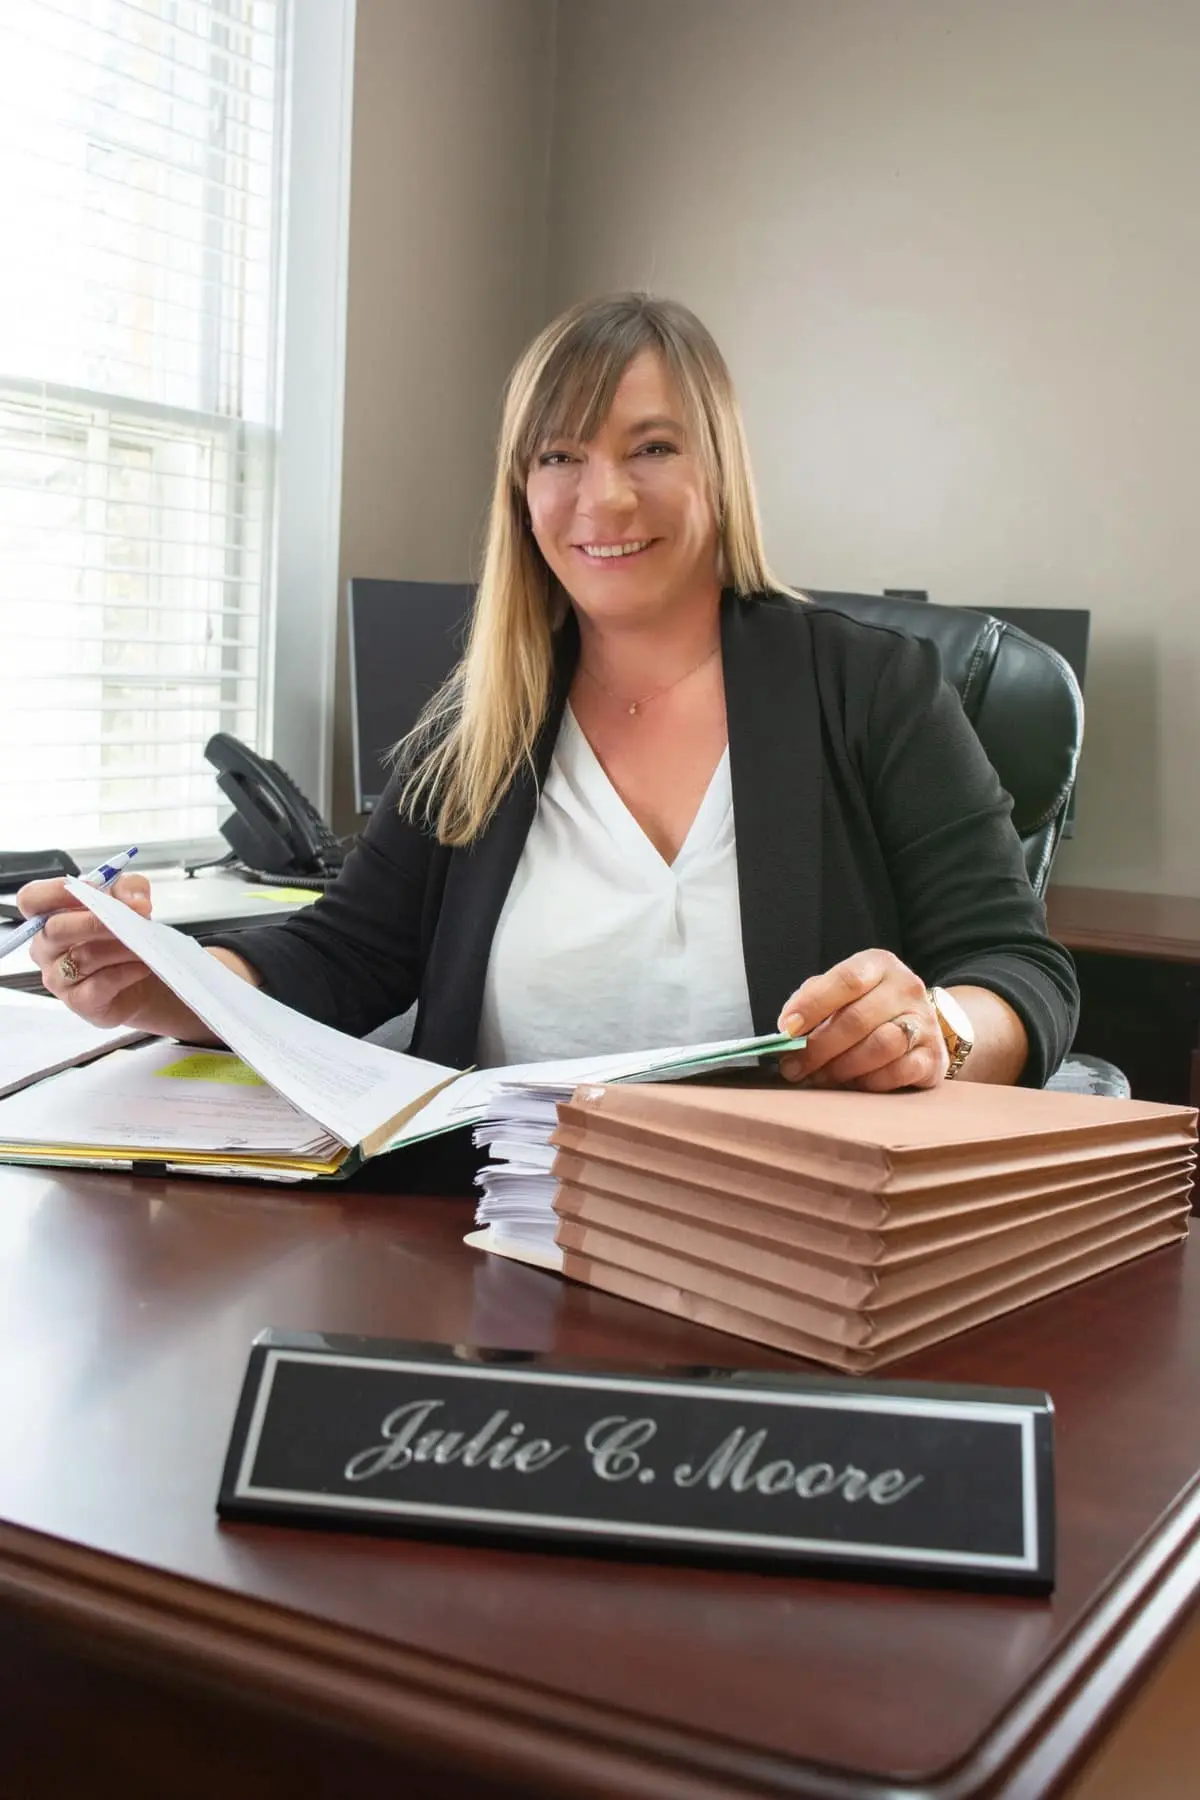 Villa Rica Slip And Fall Lawyer Julie Moore